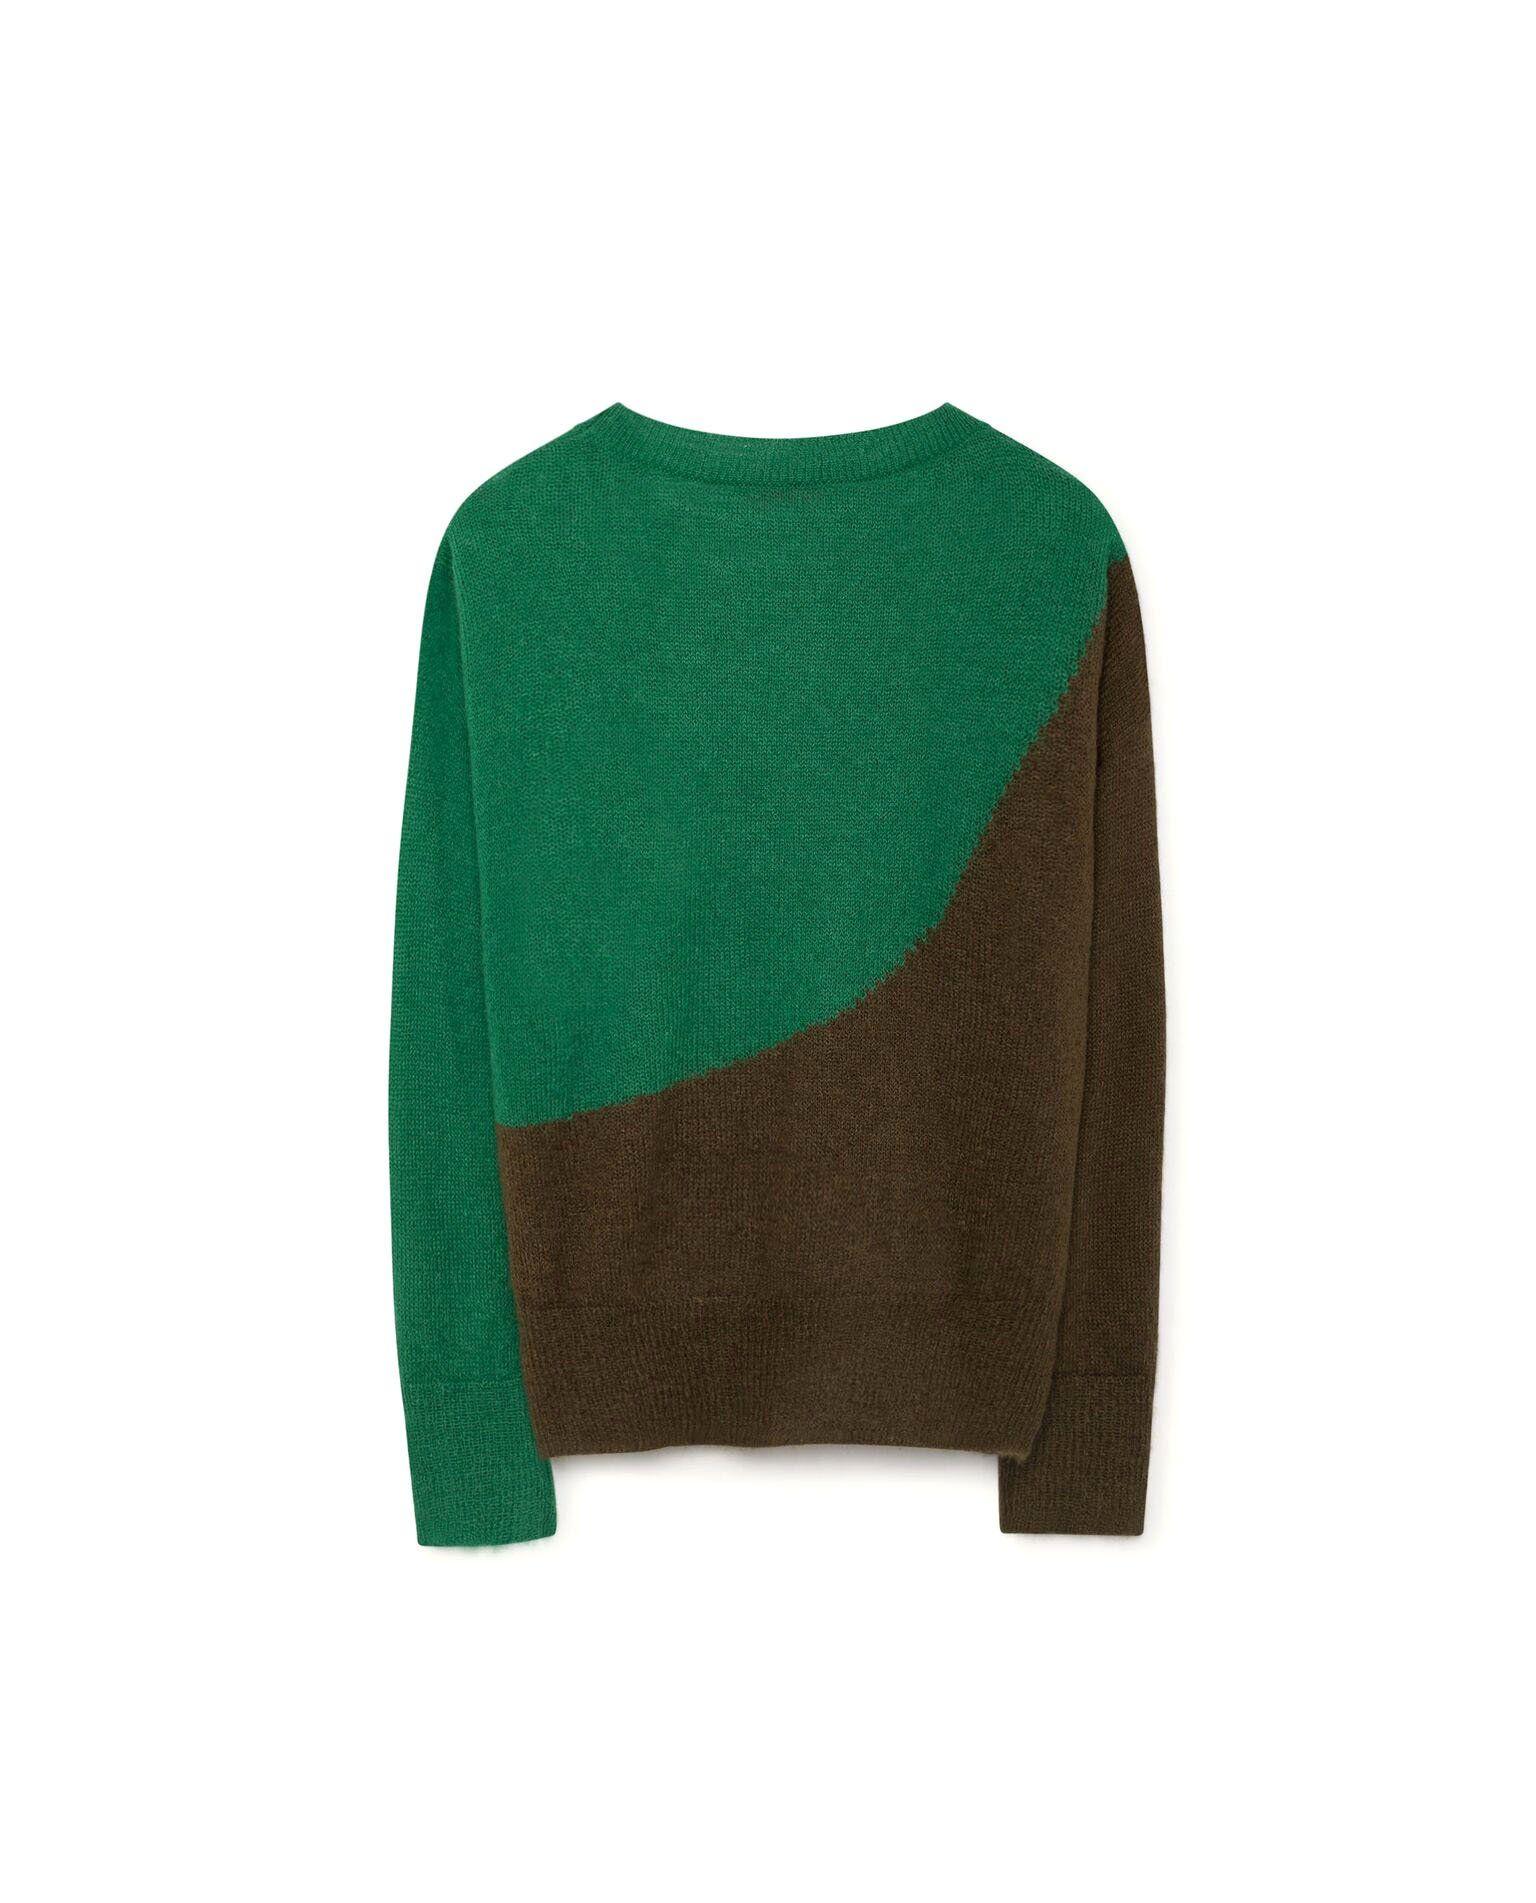 Green Triangle Clothing Logo - the animals observatory bicolor bull sweater electric green triangle